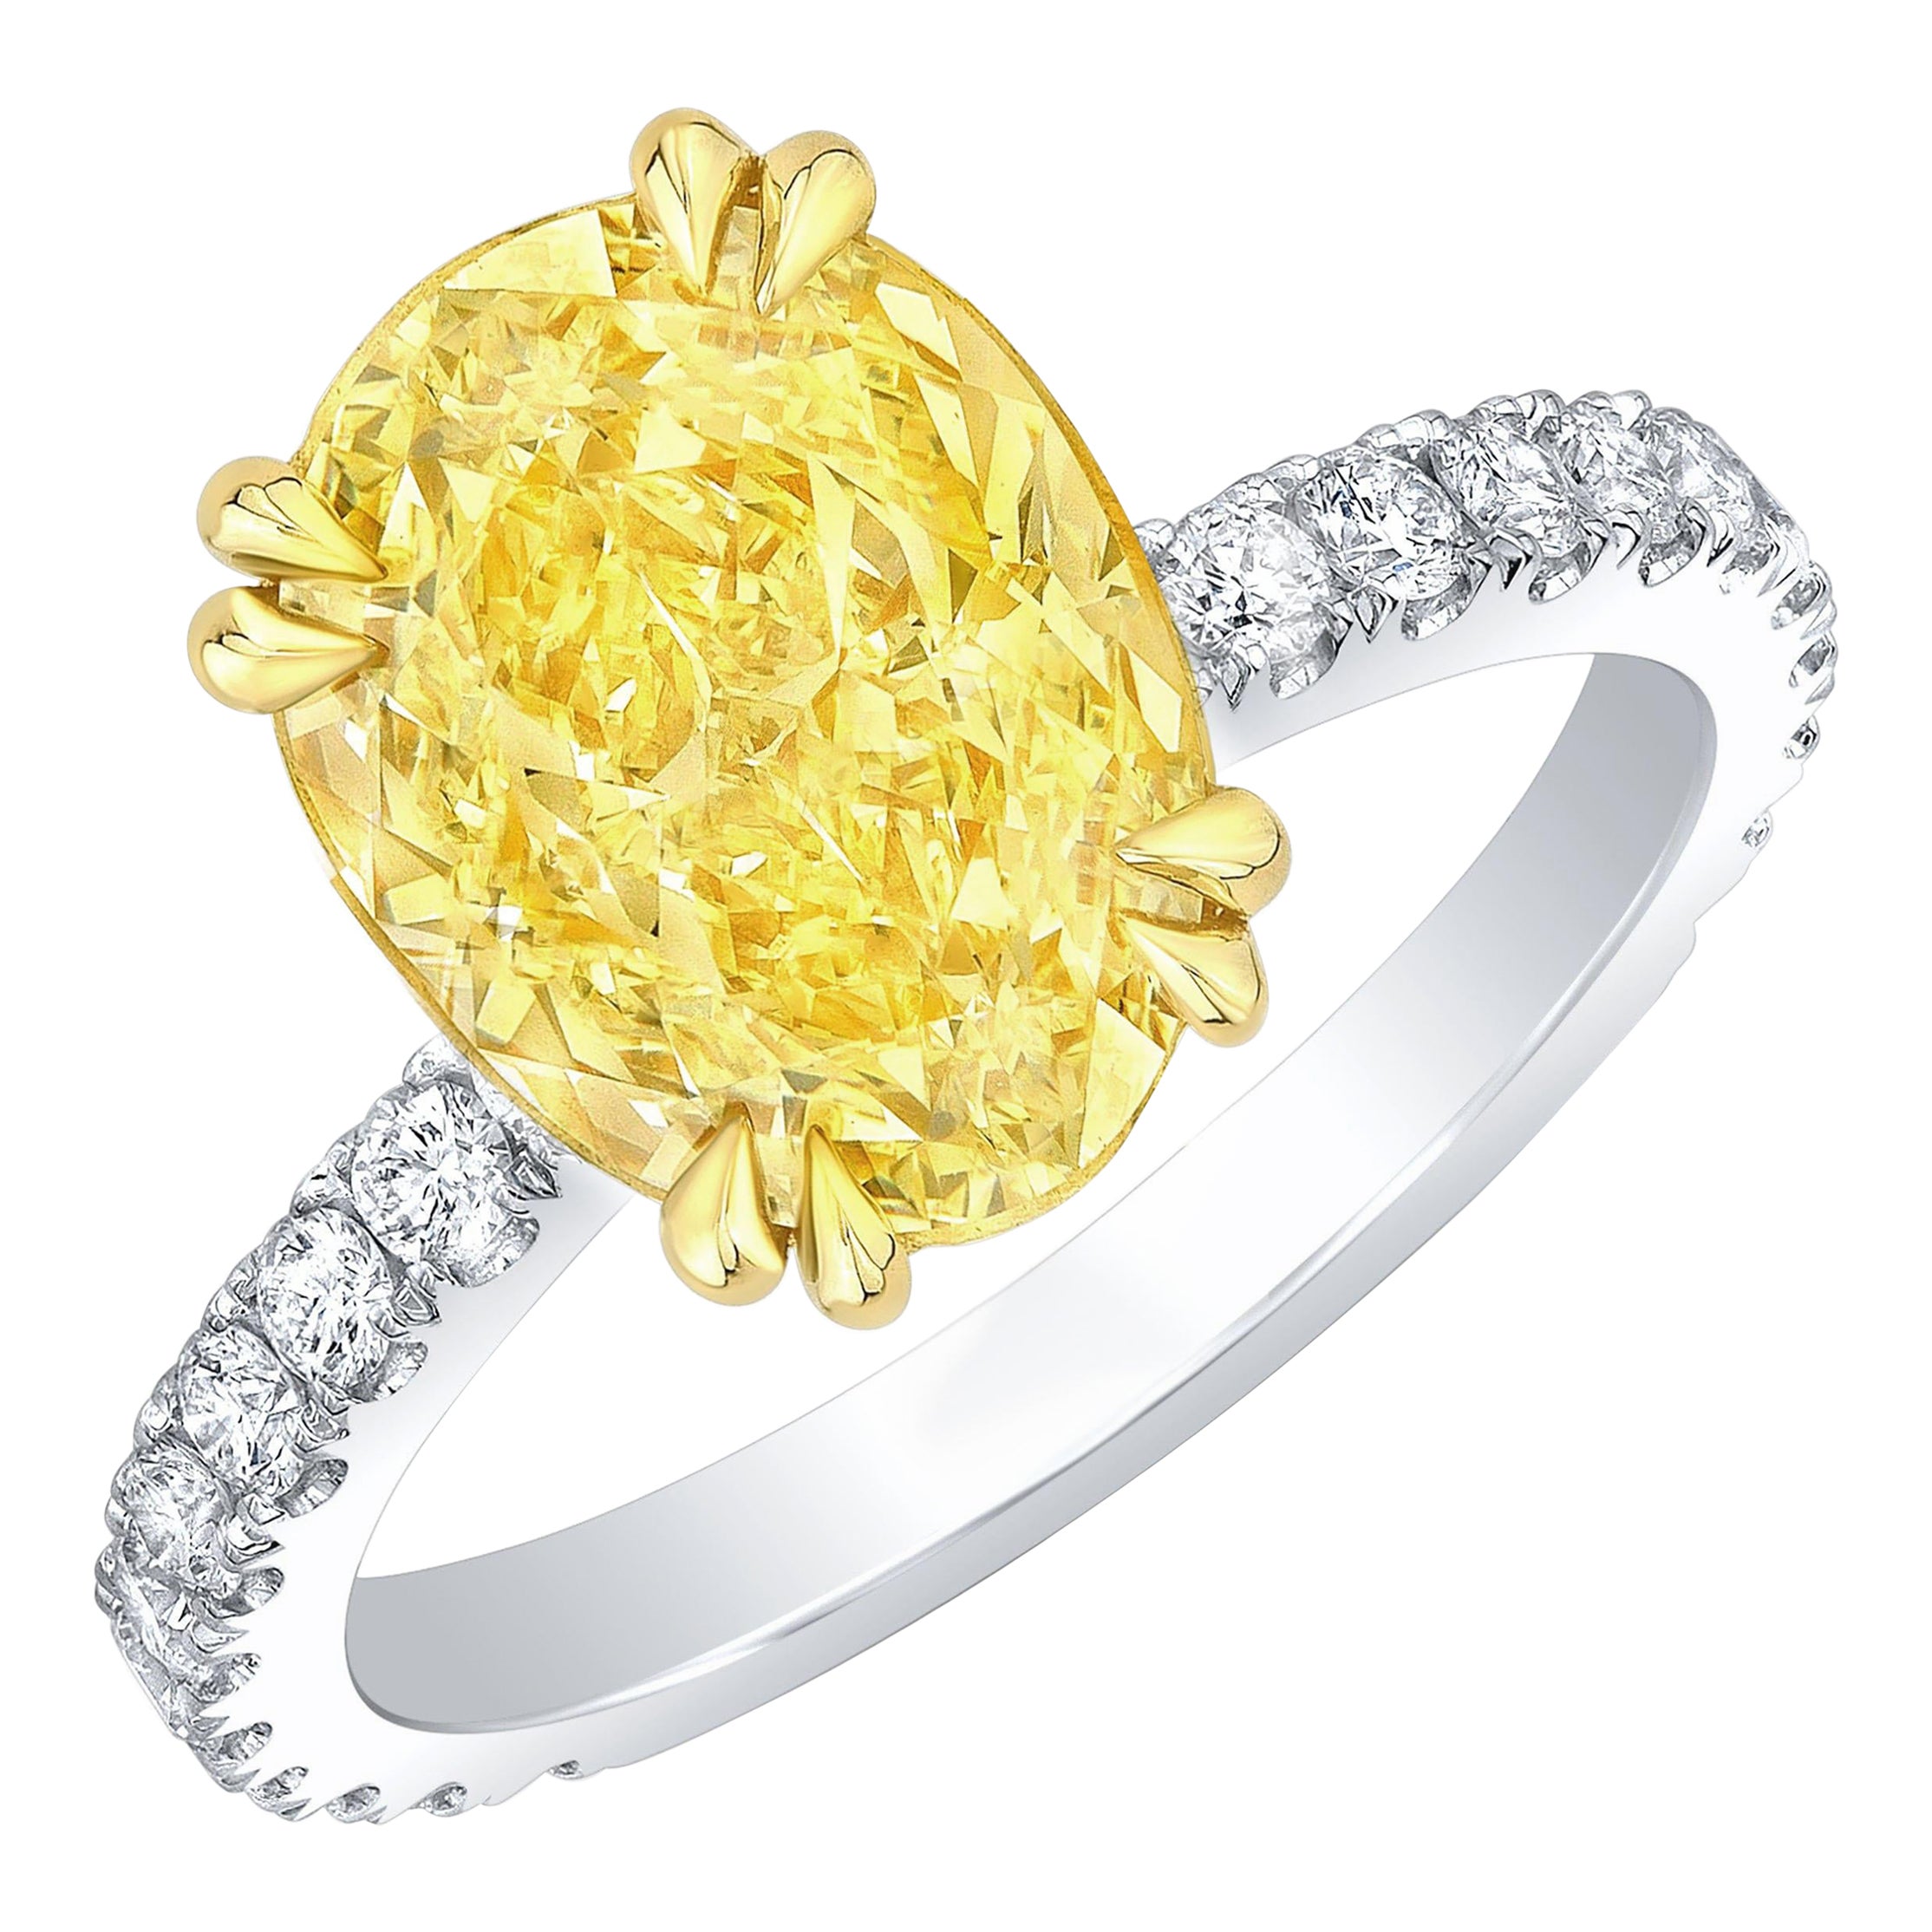 2.90 Carat Canary Fancy Yellow Oval Hidden Halo Engagement Ring VVS1 GIA For Sale